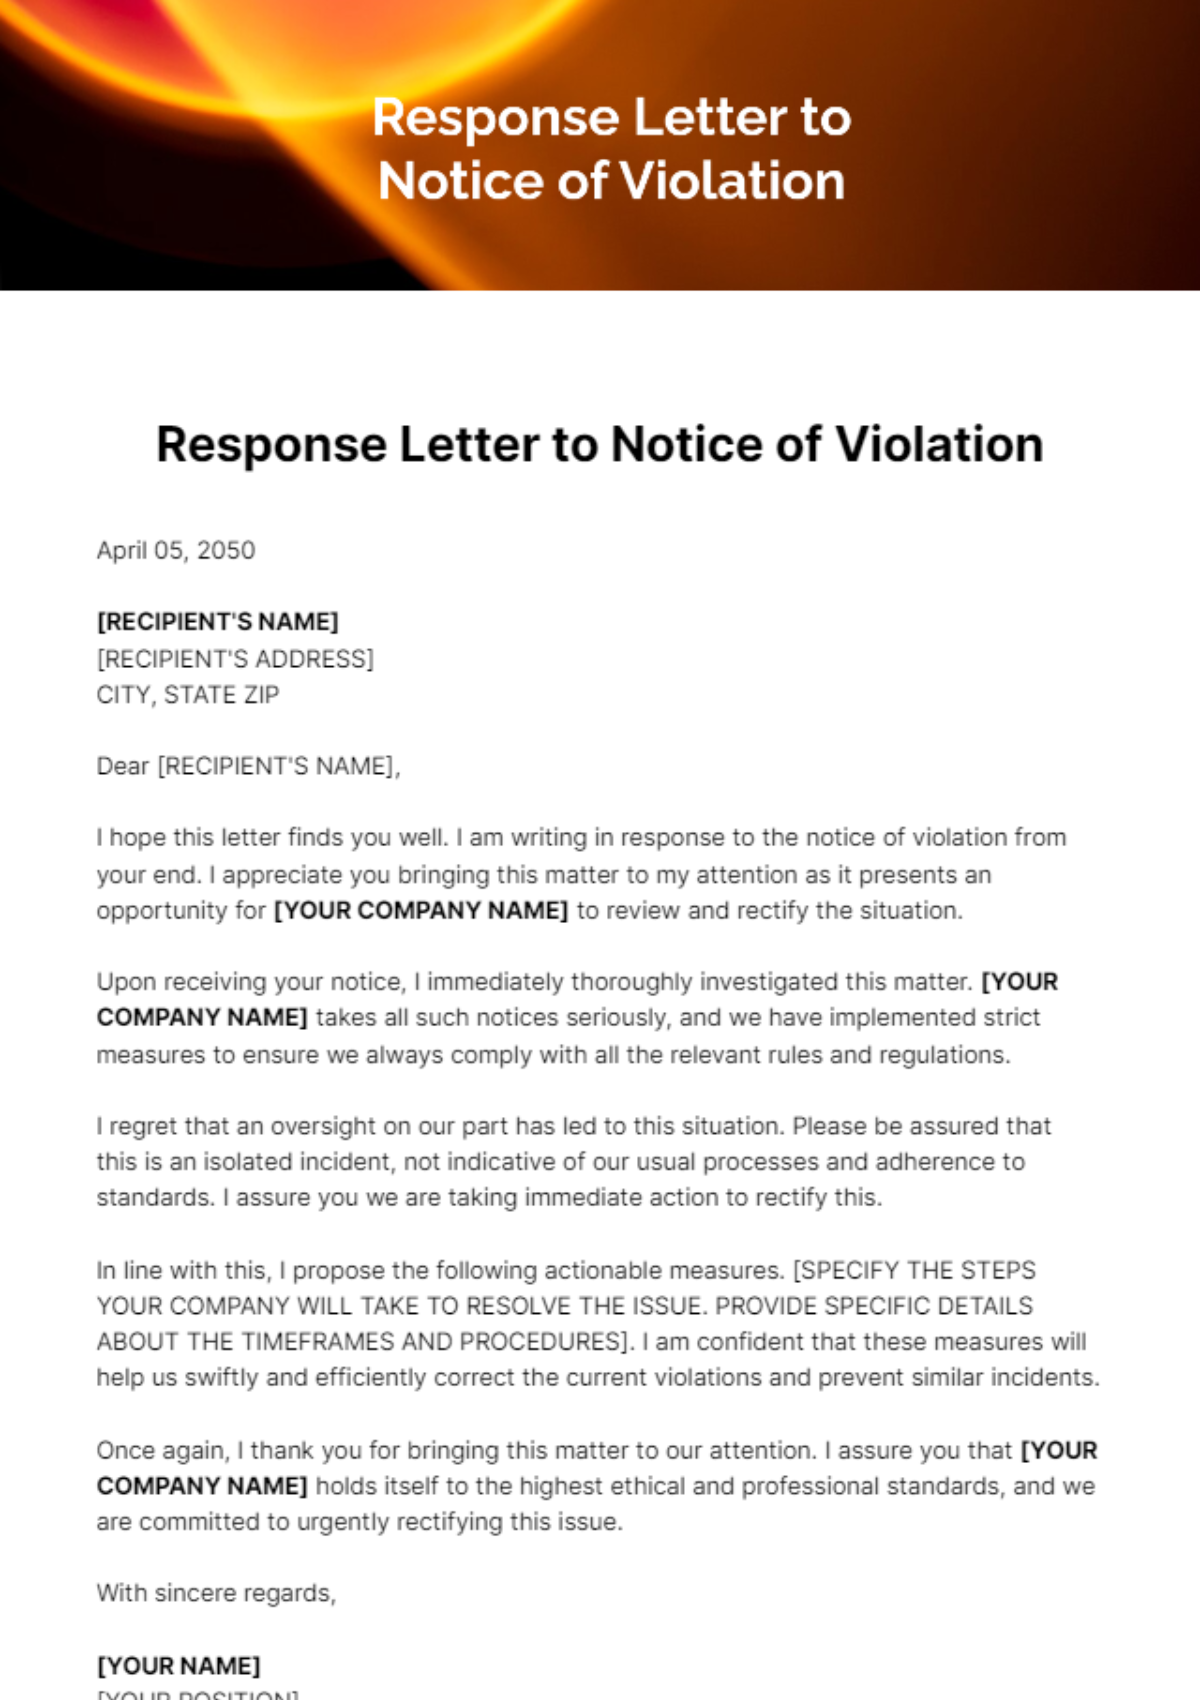 Response Letter to Notice of Violation Template